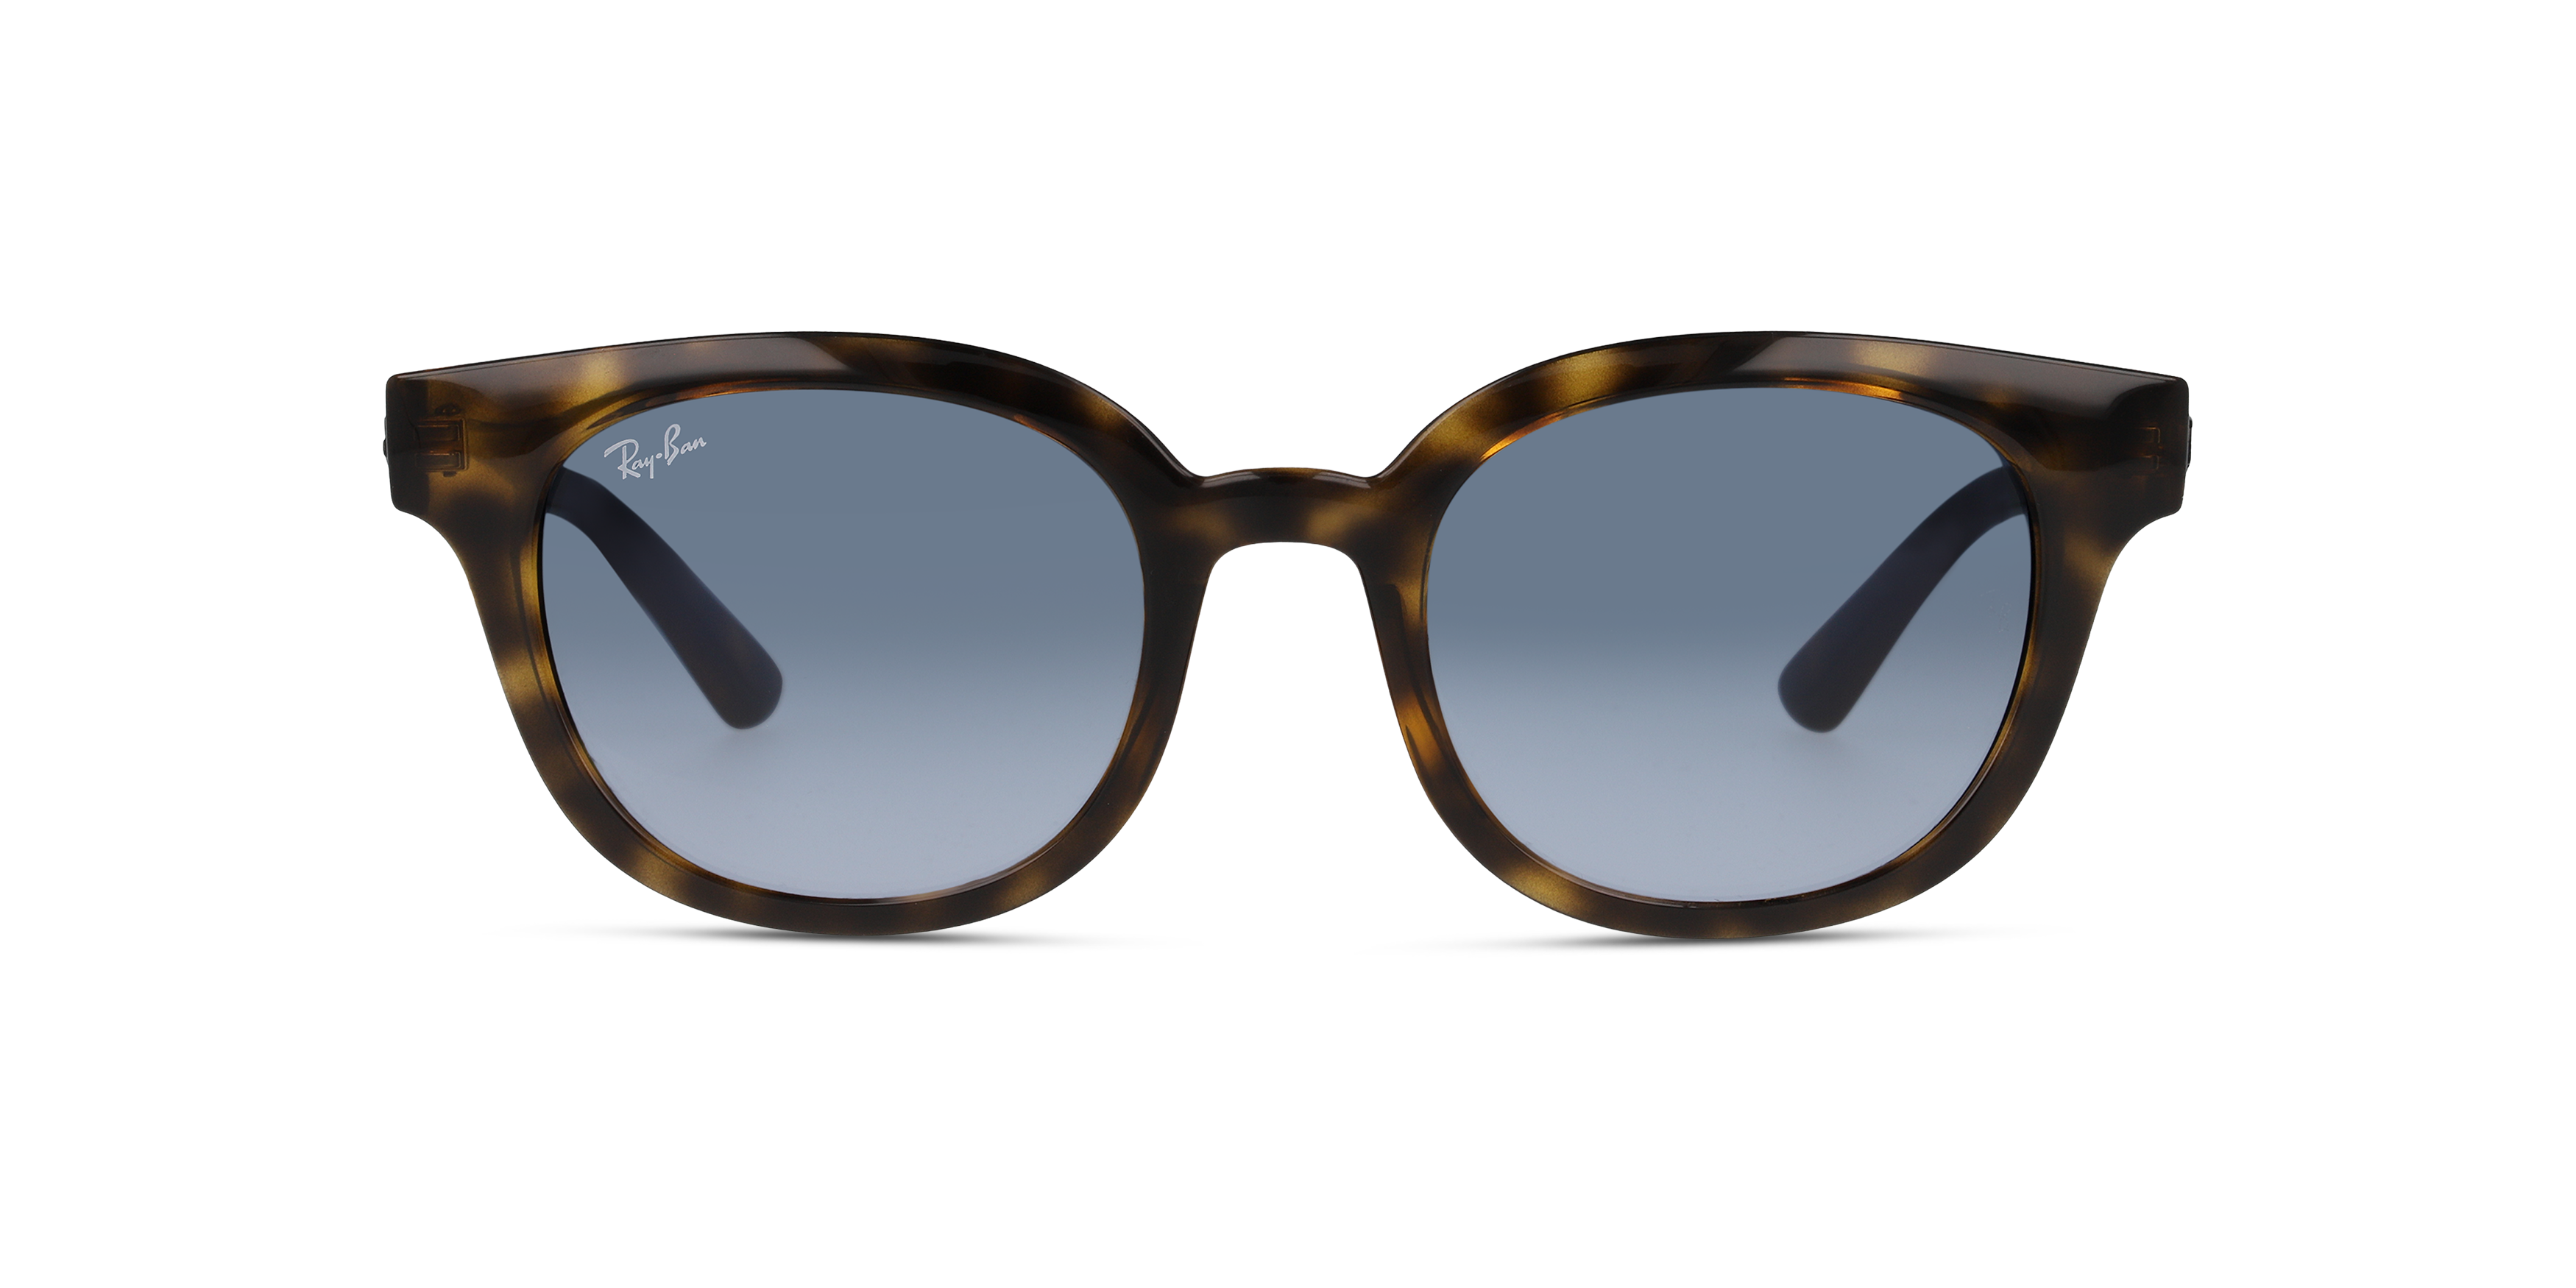 [products.image.front] Ray-Ban RB4324 710/Q8